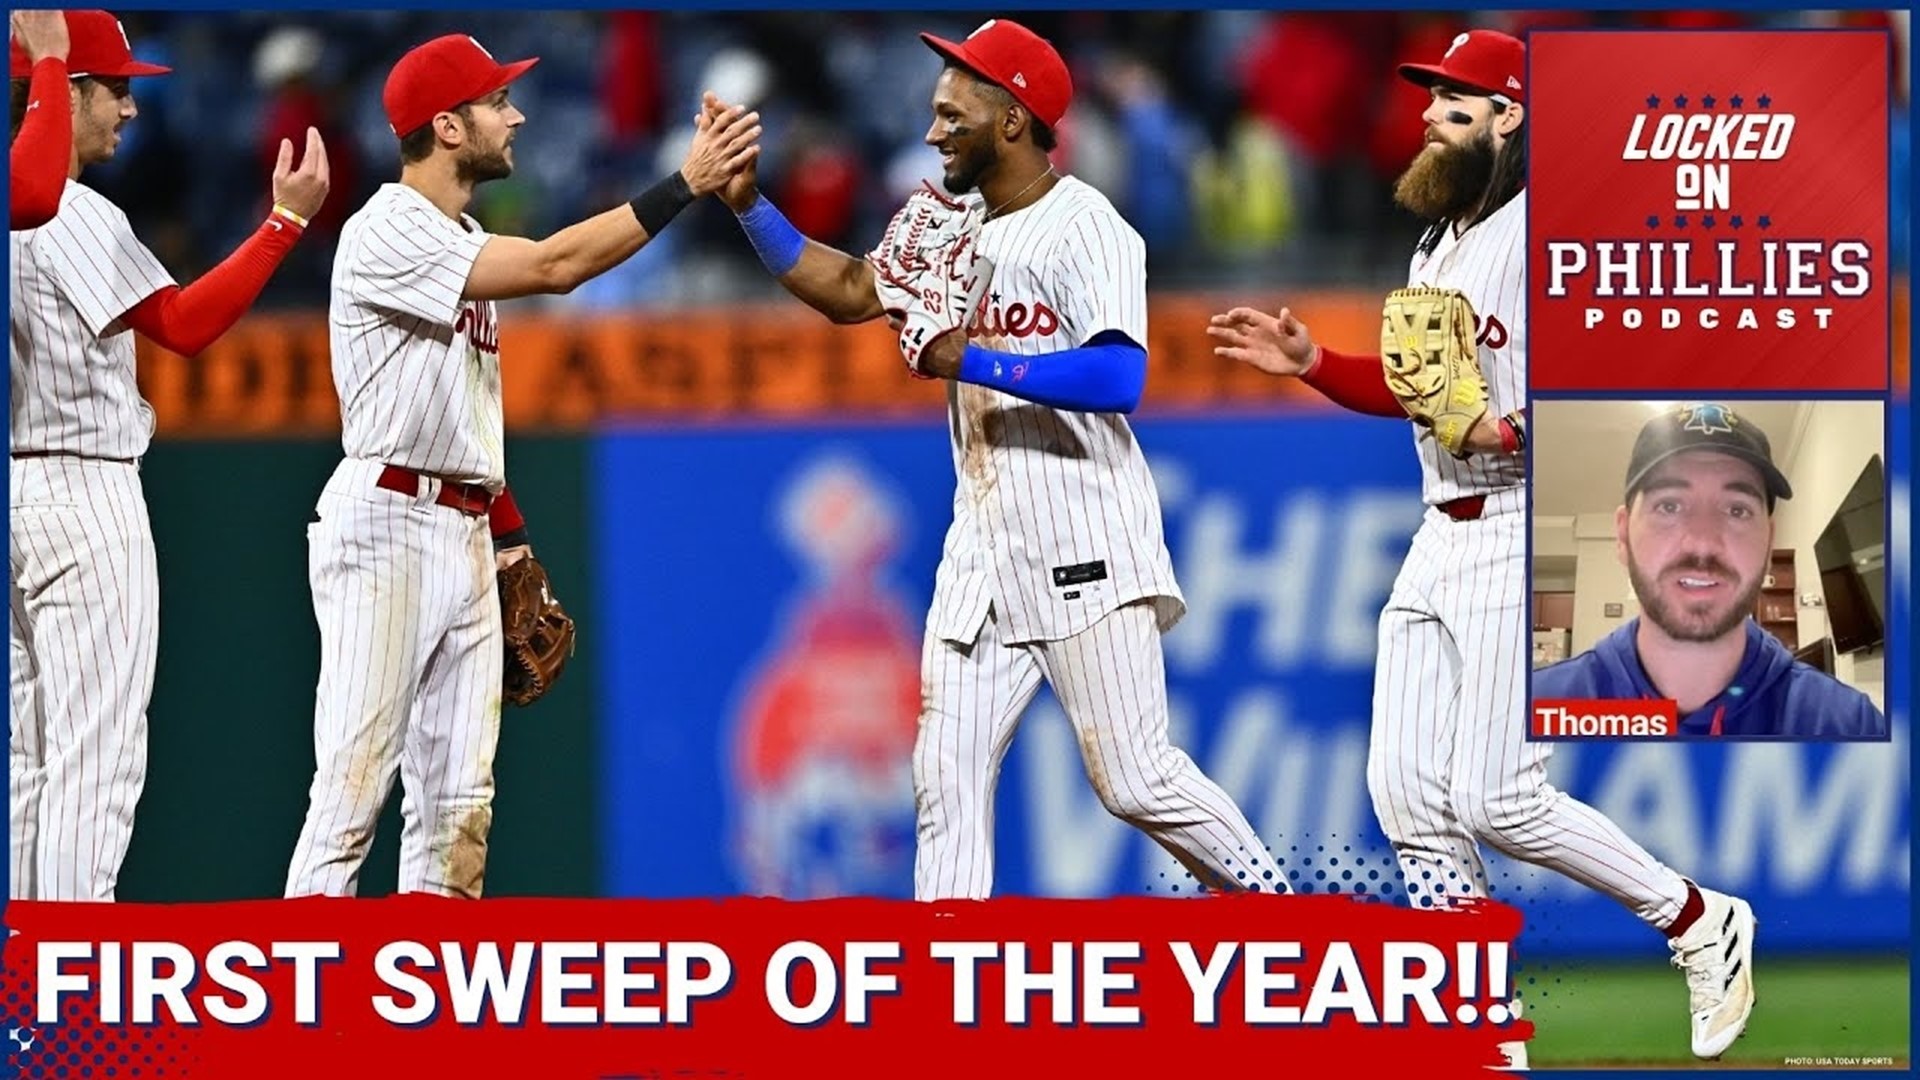 In today's episode, Connor breaks down the first sweep of the year for the Philadelphia Phillies as they take all 3 games of their series vs. the Colorado Rockies.